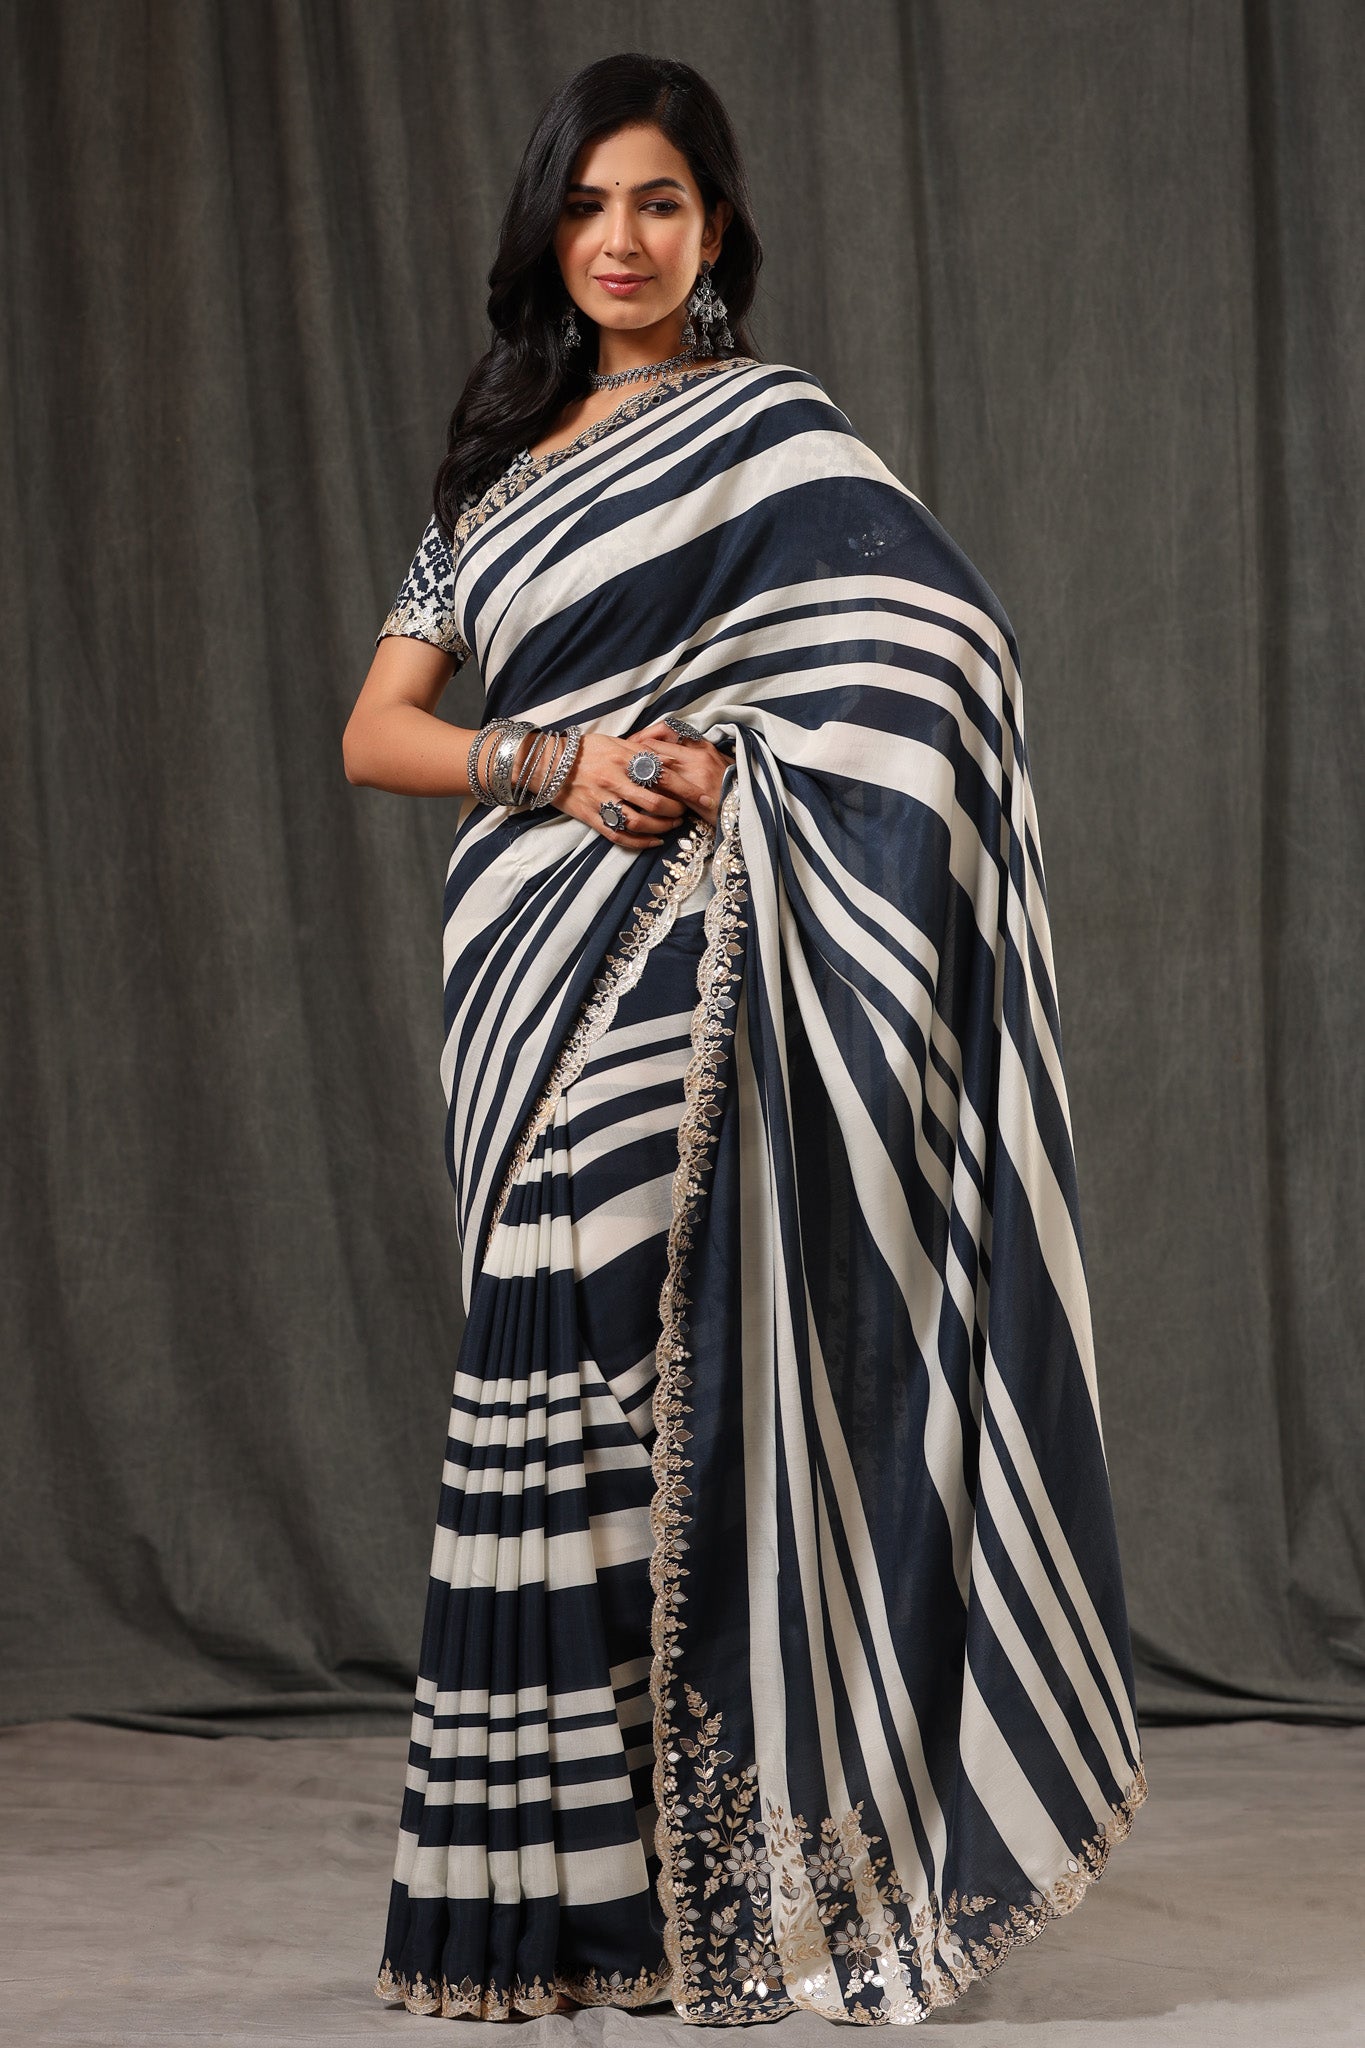 Buy stunning black and white stripes crepe georgette sari online in USA with saree blouse. Look classy at weddings and special occasions in exquisite designer sarees, embroidered sarees, party sarees, handwoven saris, pure silk sarees, Banarasi sarees, Kanjivaram sarees from Pure Elegance Indian saree store in USA.-front